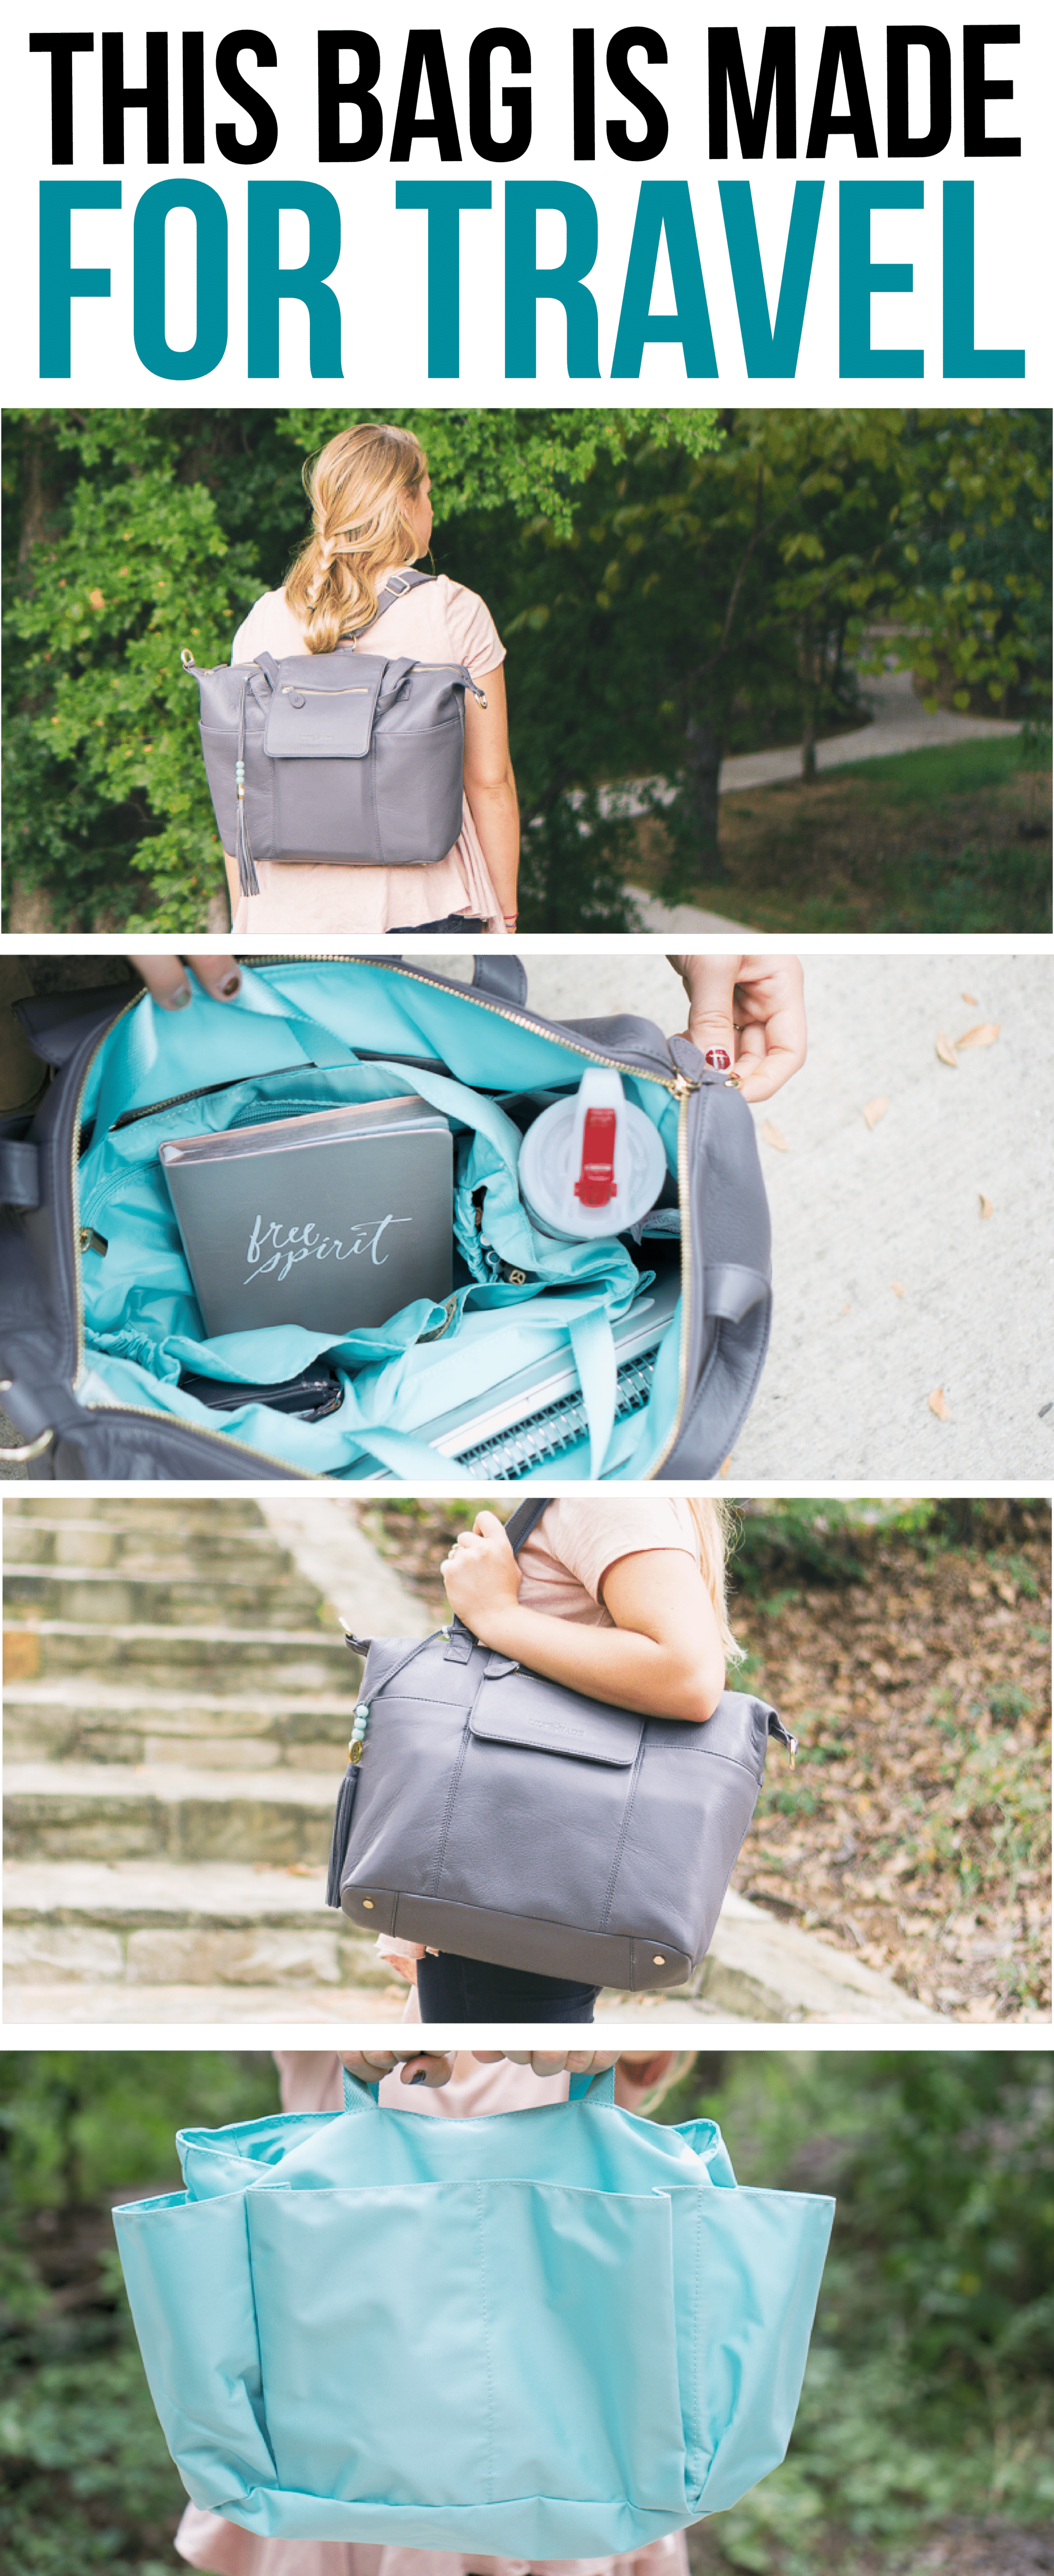 The linen insert in this Lily Jade diaper bag is a huge perk!